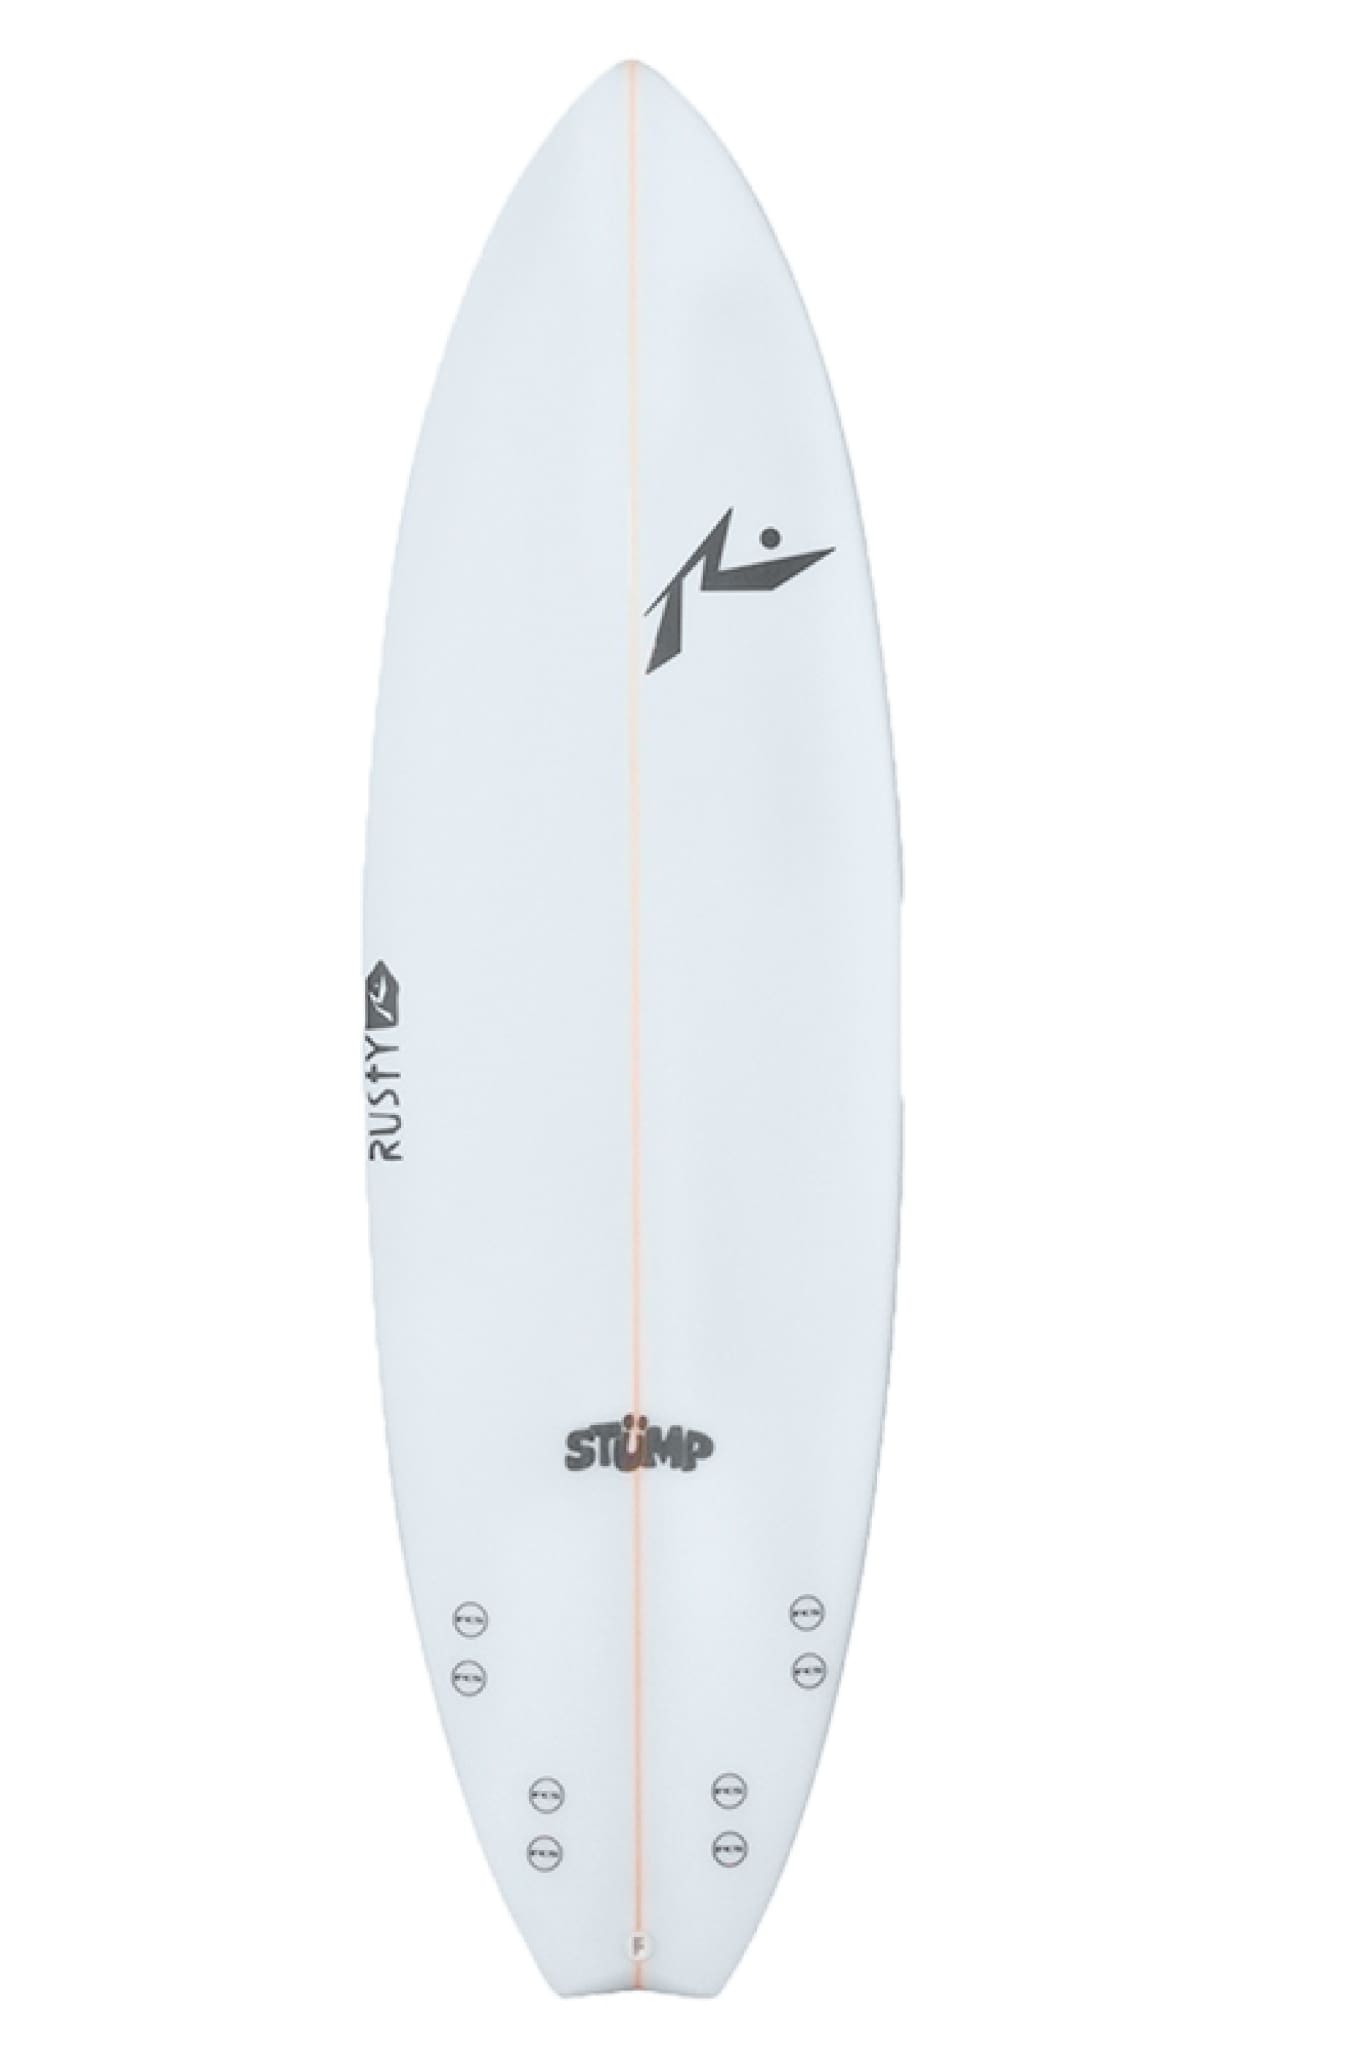 Stump | Surfboards-Rusty Surfboards South Africa